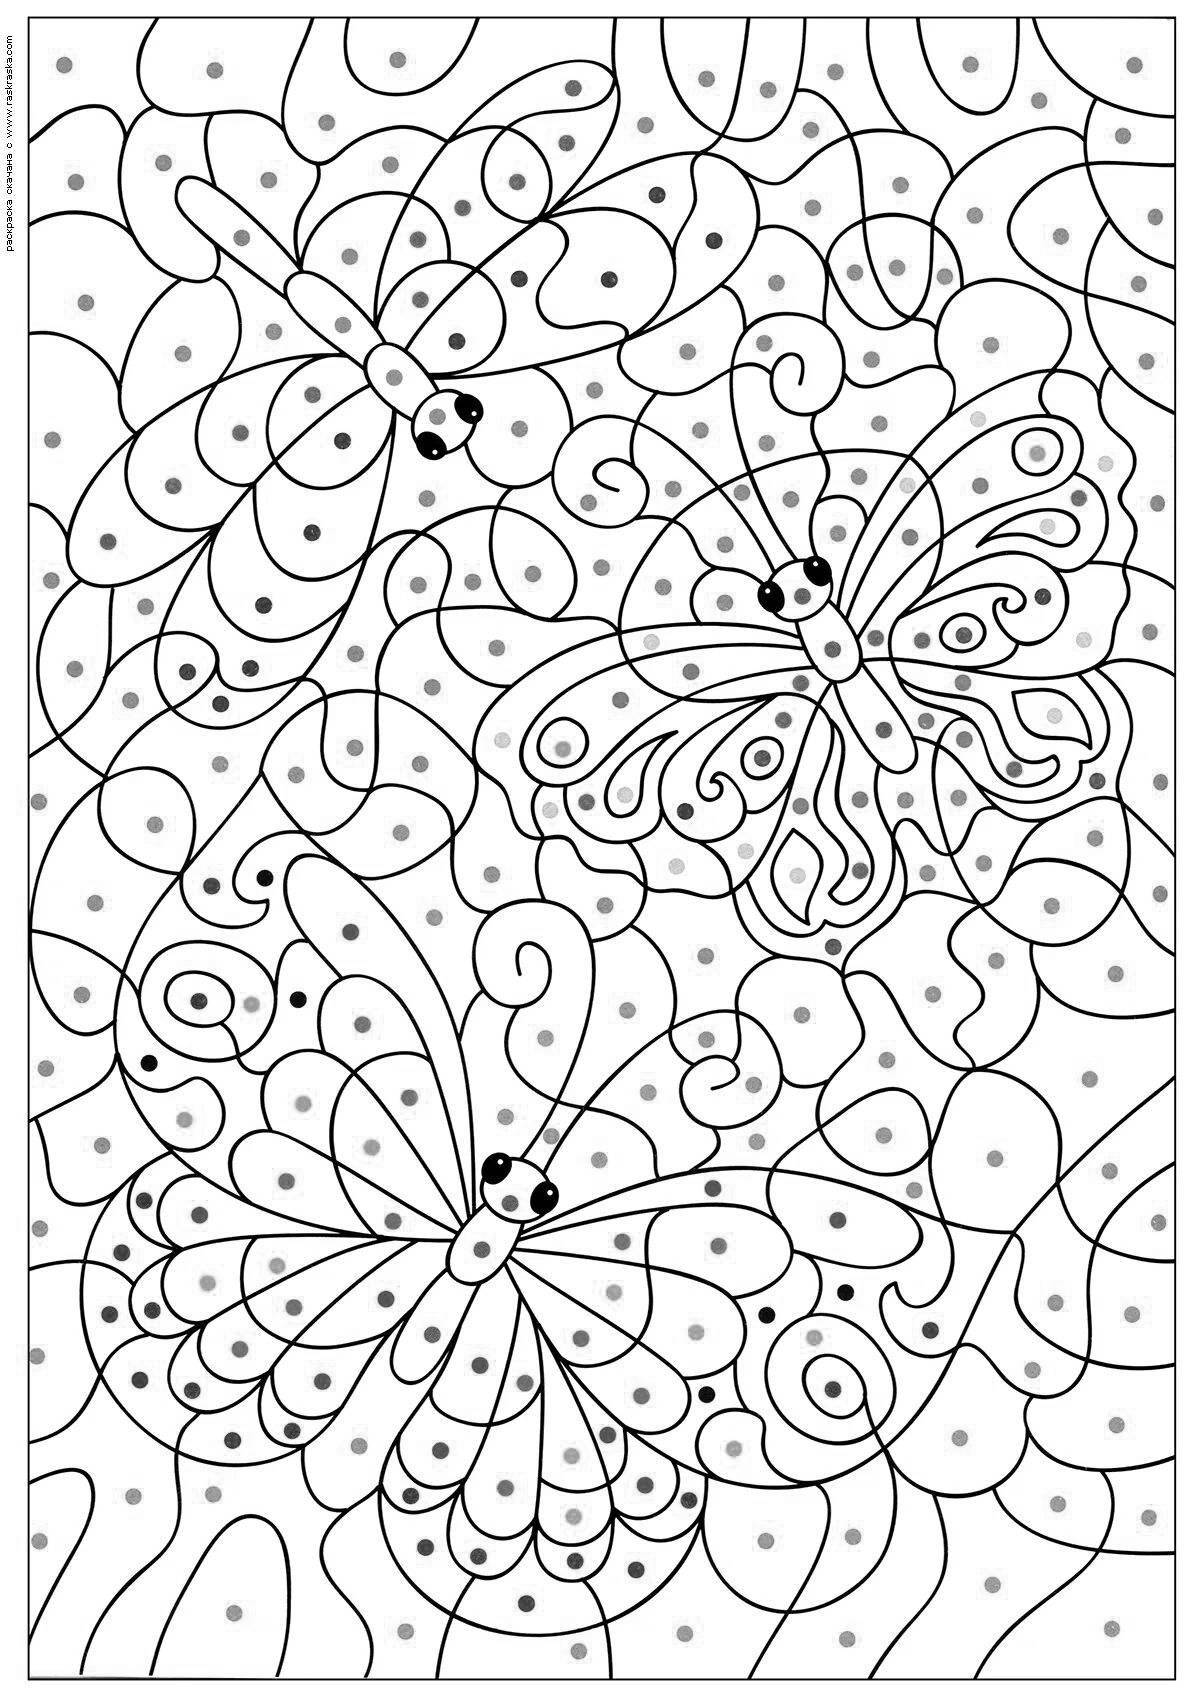 Coloring book shining butterfly by numbers